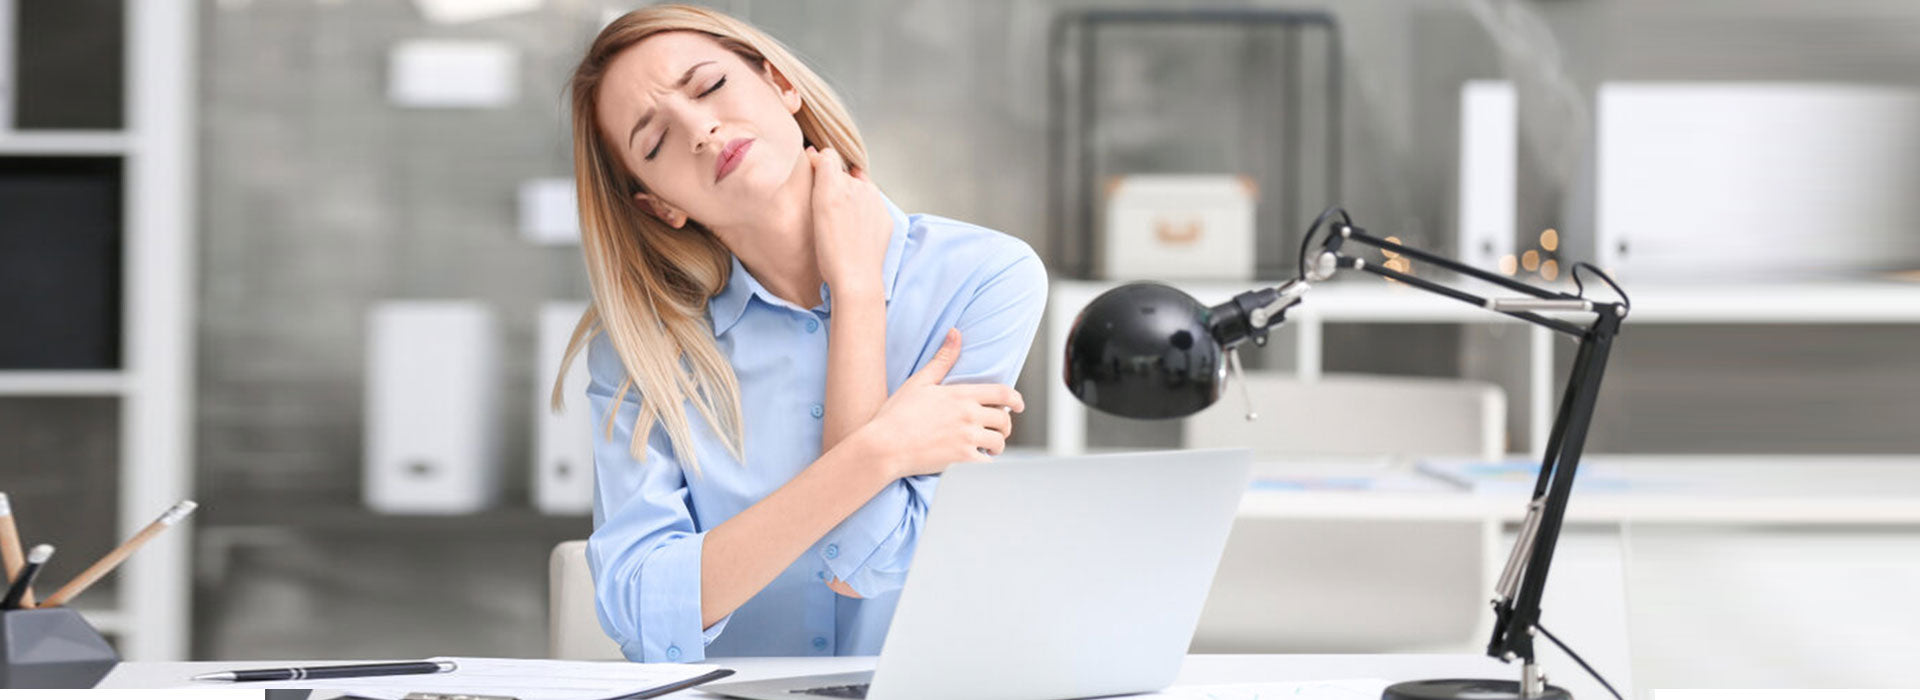 How to Avoid Neck Pain While Using a Laptop (And What OMOTON Offers: Ergonomic Laptop Stand)